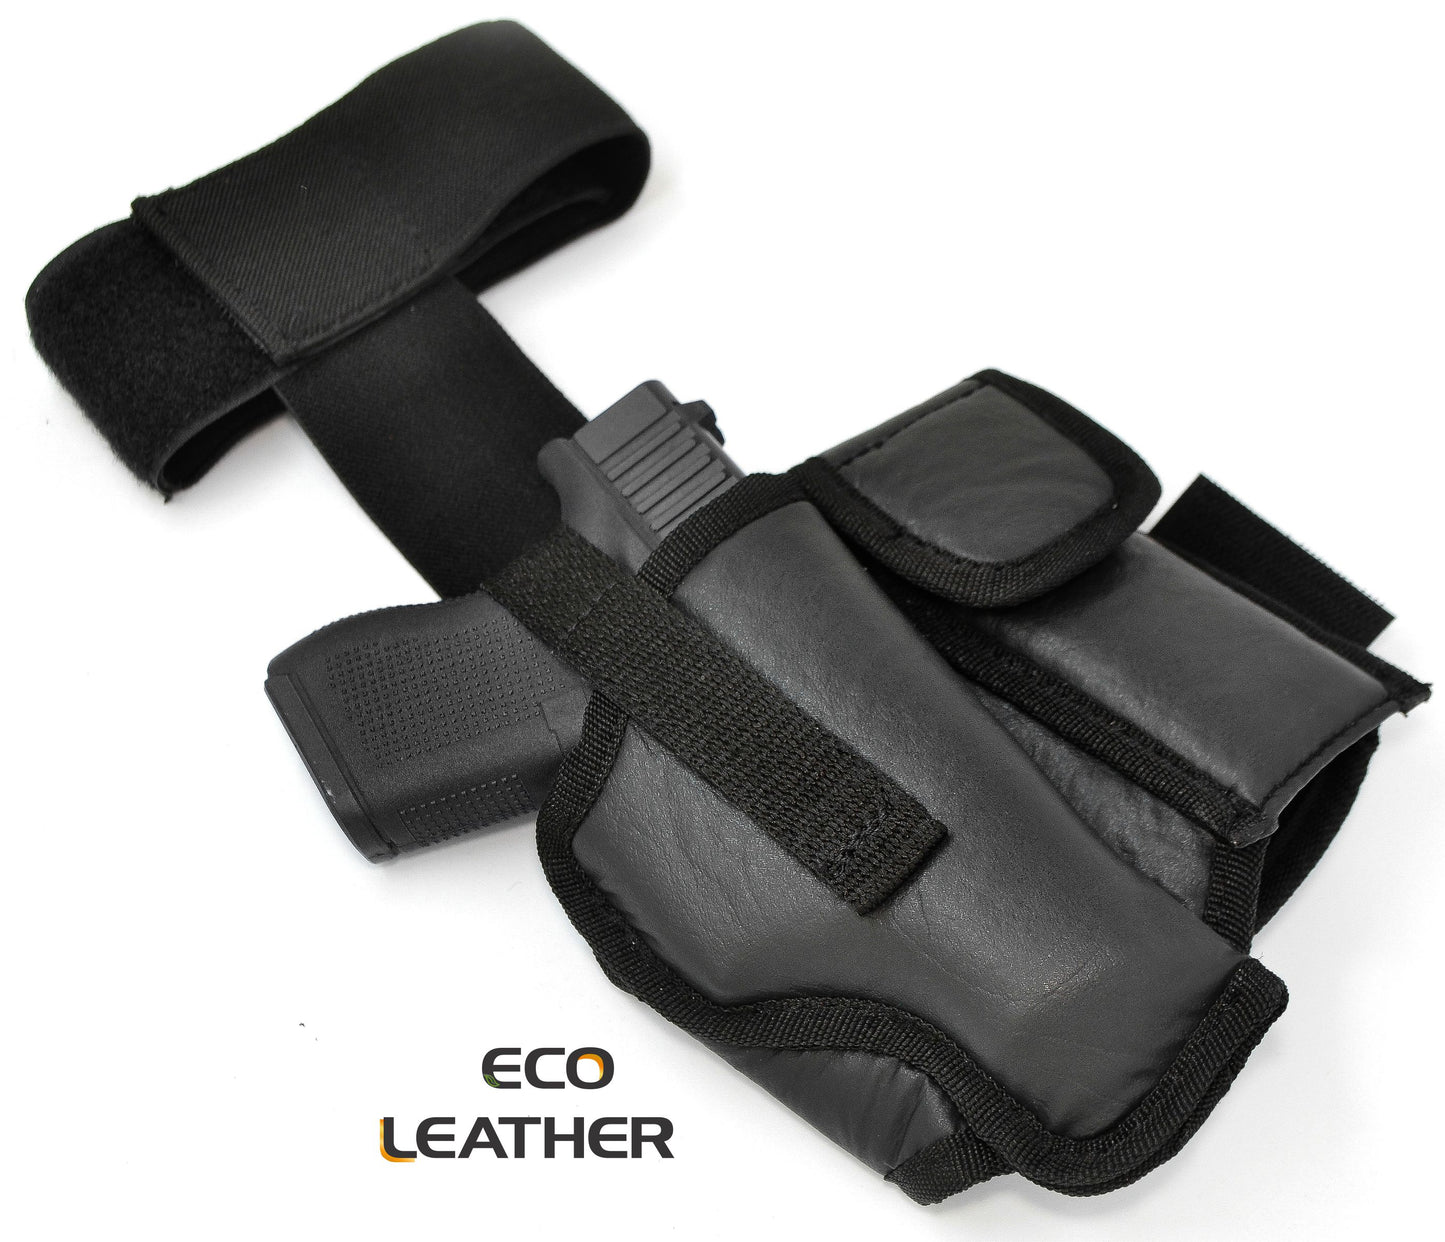 ECO-LEATHER Ankle Holsters